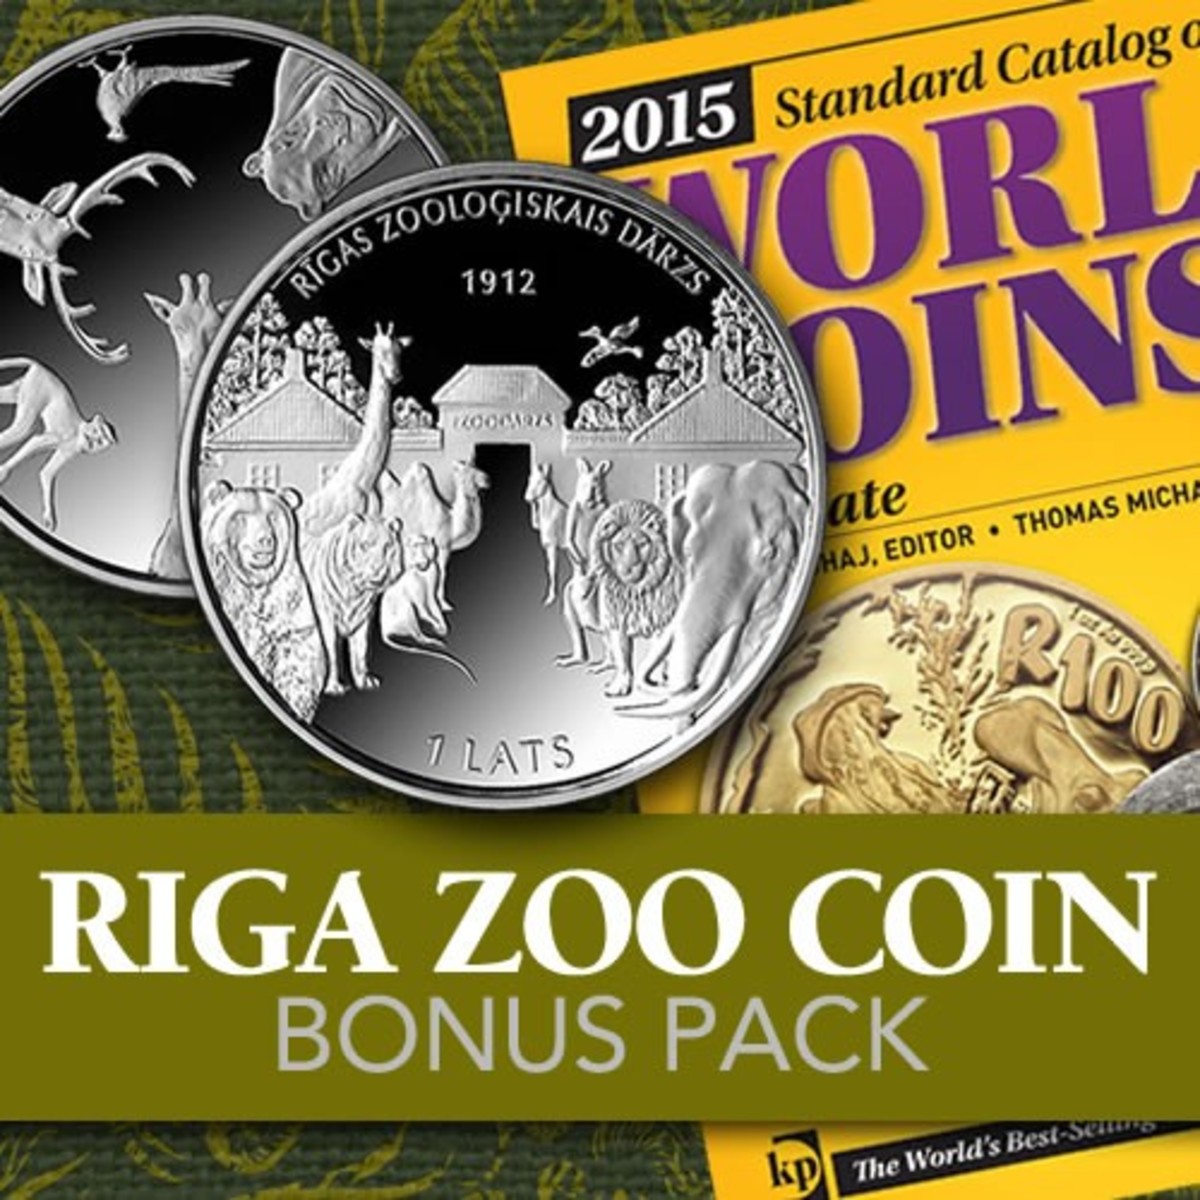 Get both the Riga Zoo Coin and the Standard Catalog of World Coins, 2001-Date paperback edition in this exclusive collection.